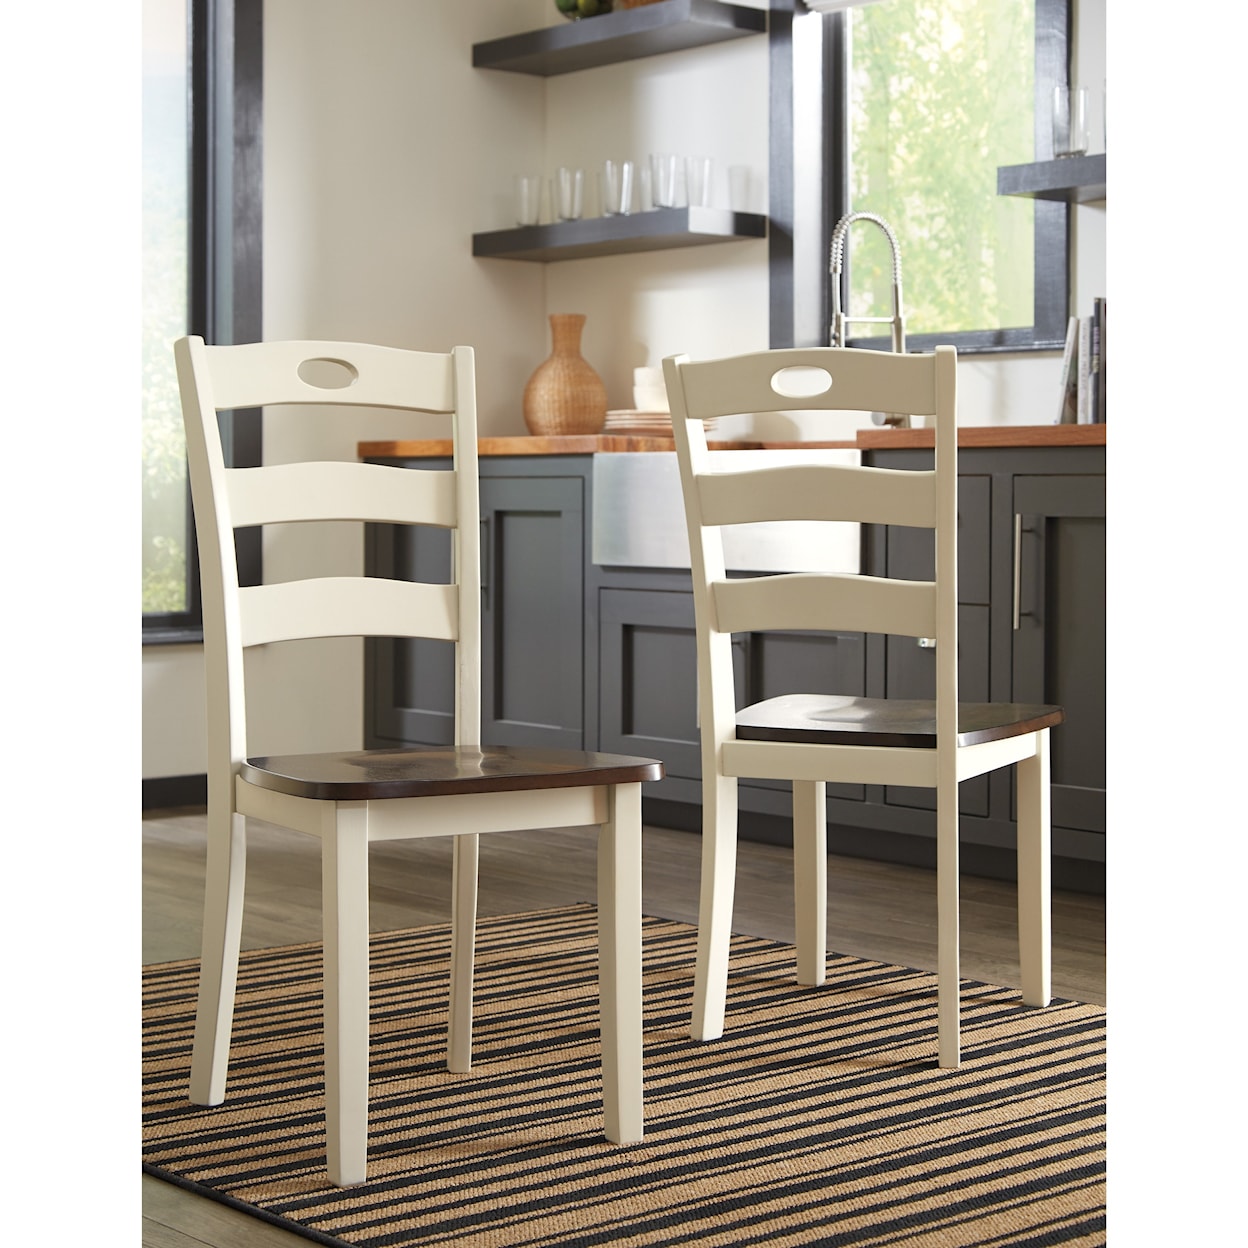 Signature Design by Ashley Woodanville 7-Piece Dining Room Table Set